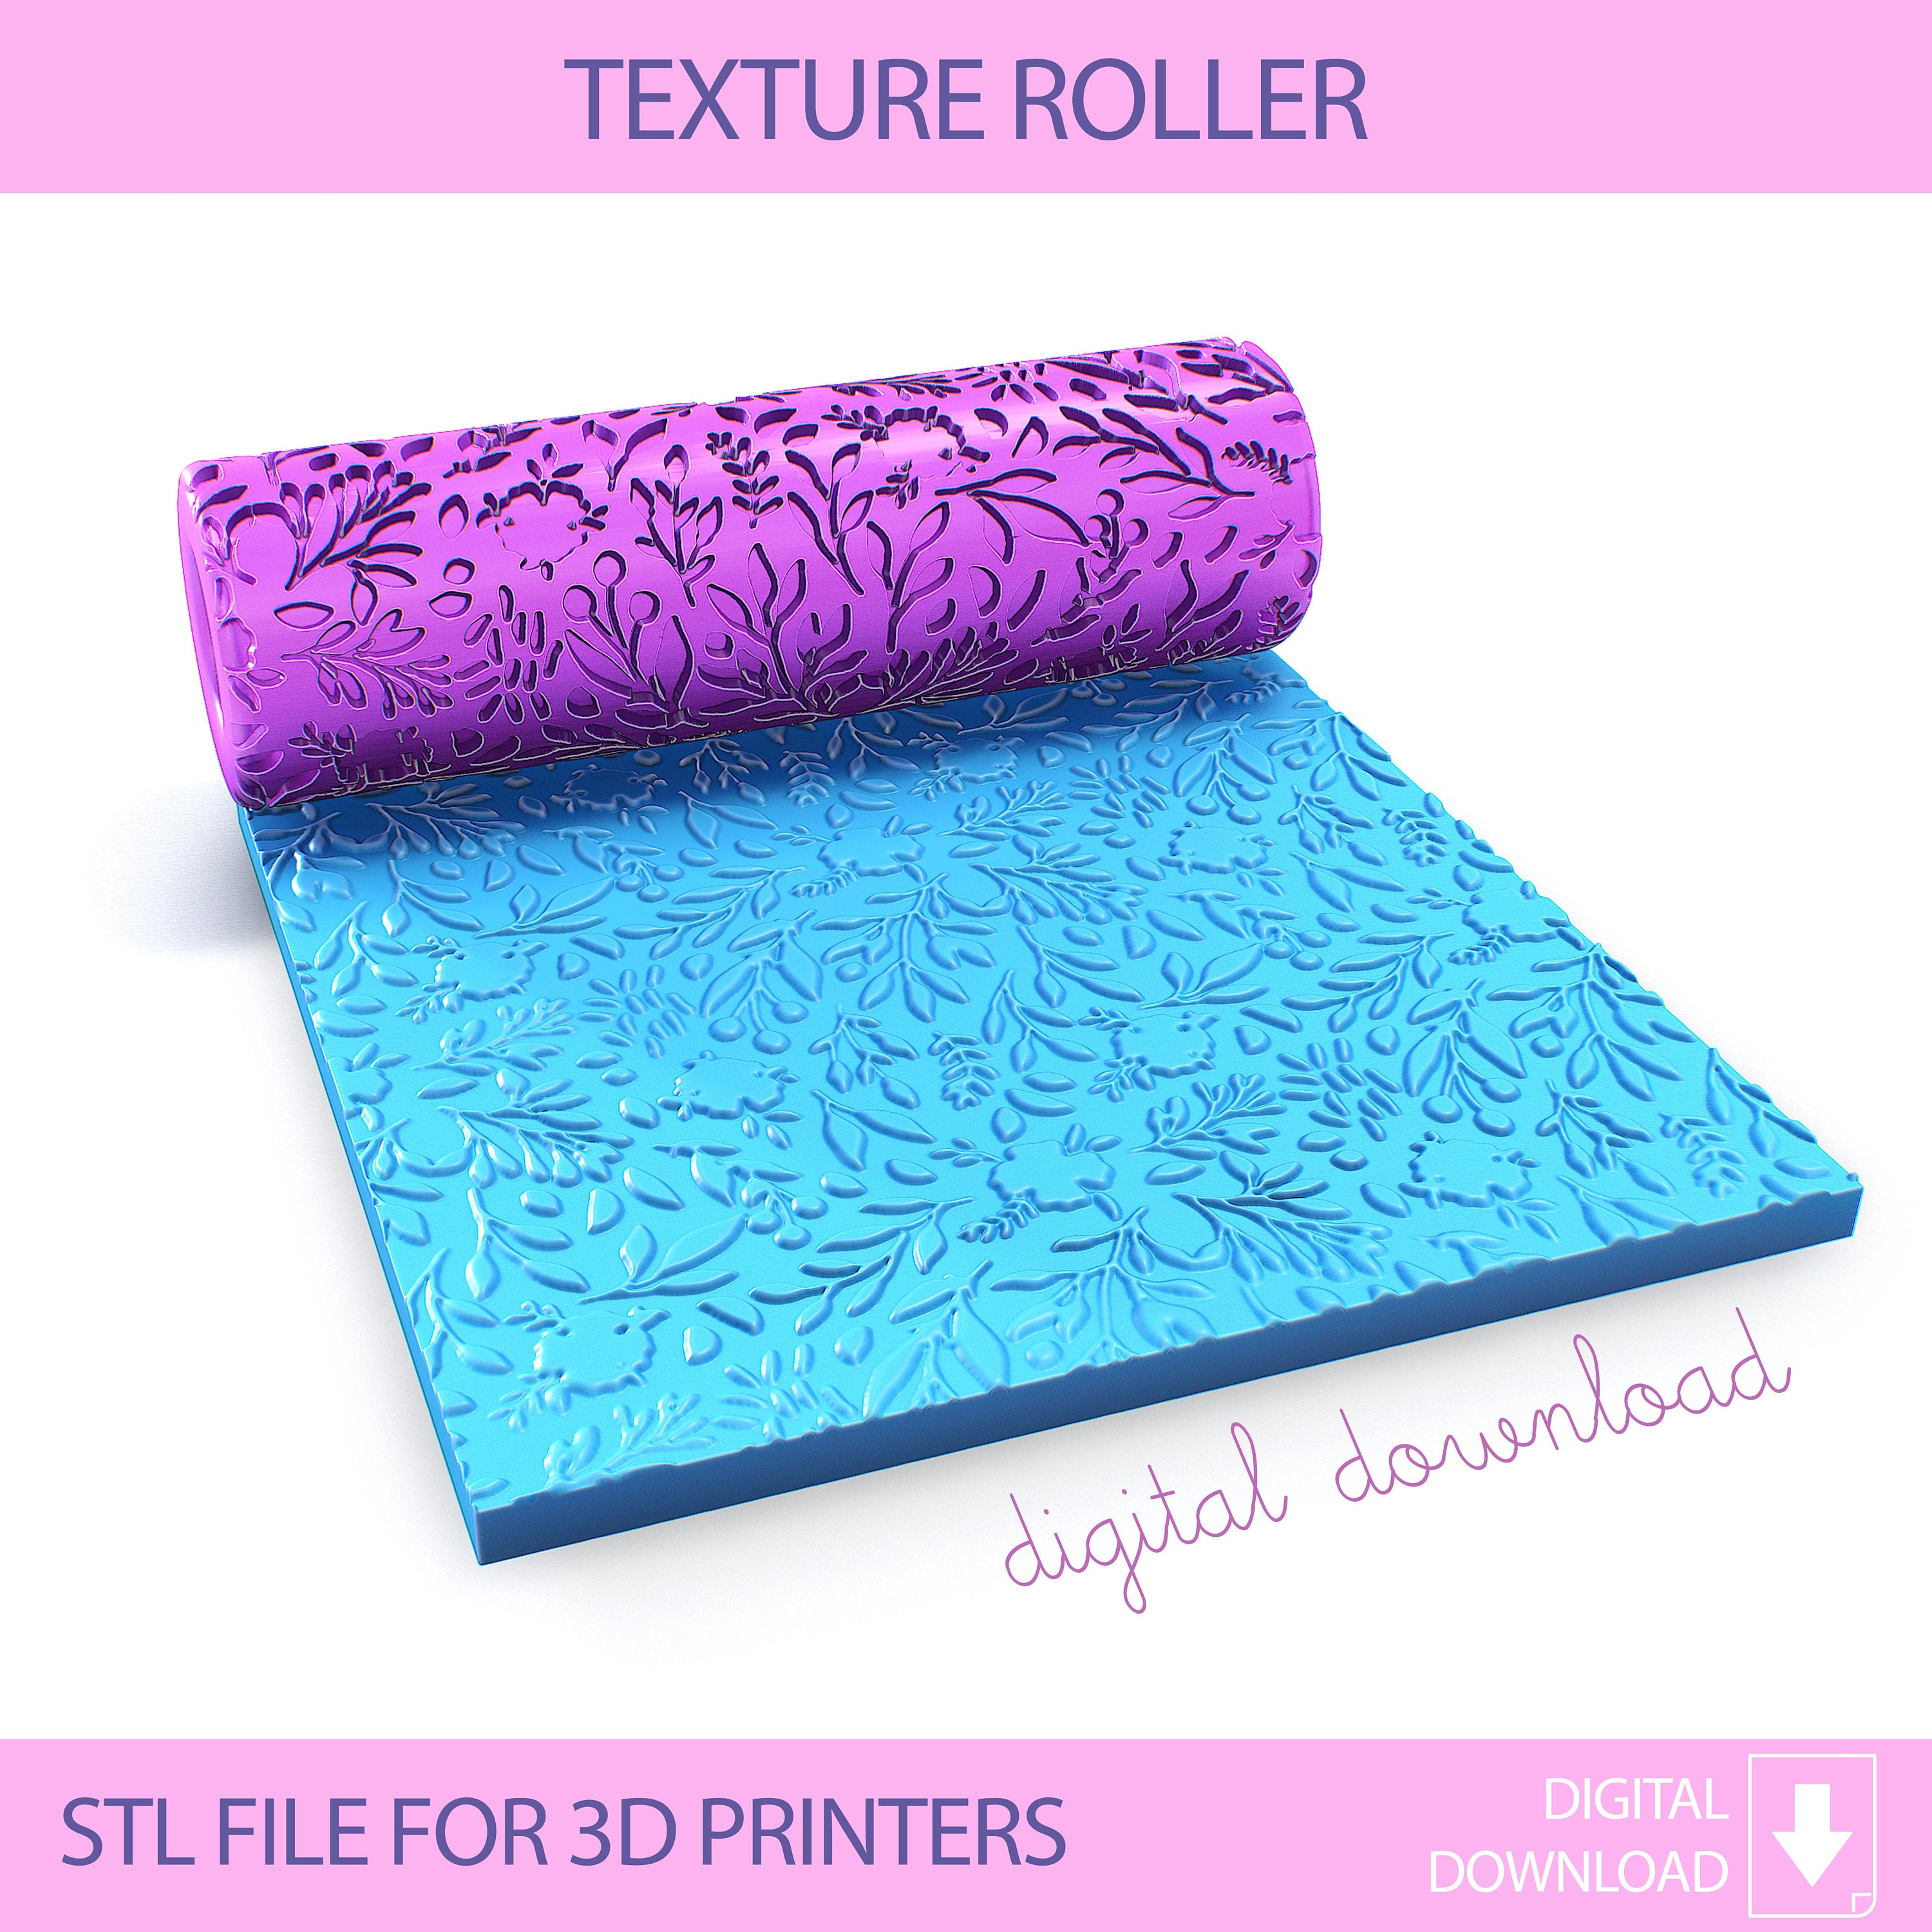 Floral Clay Texture roller – LlamasKiss